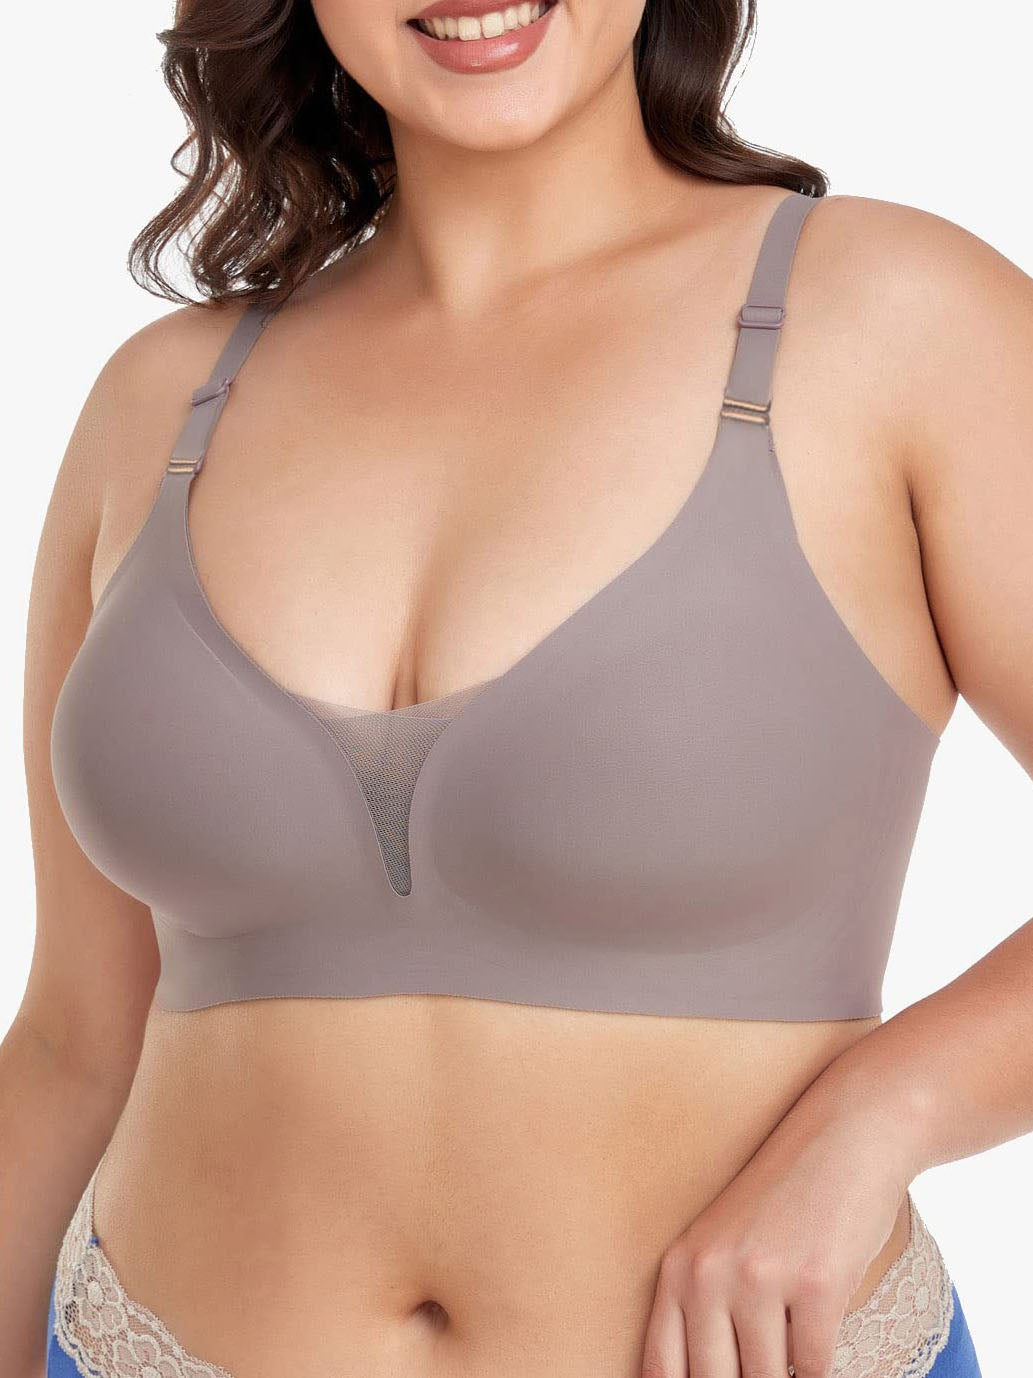 Mesh Bras for Women No Underwire Wireless Comfort Lift Push Up Bralettes for Women with Support and Bra Gray